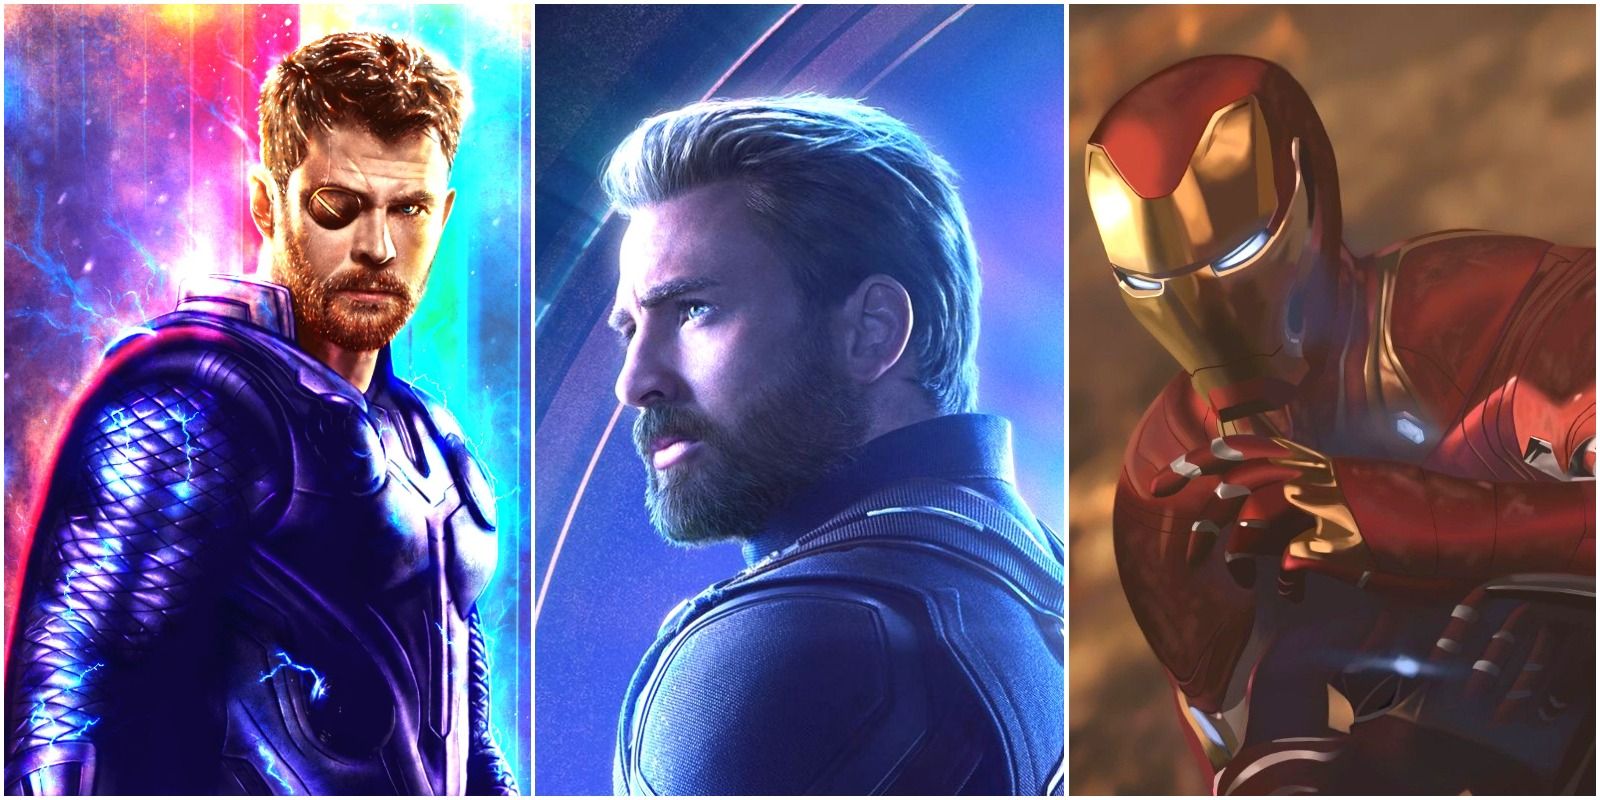 Thor, Cap America, and Iron Man from the MCU